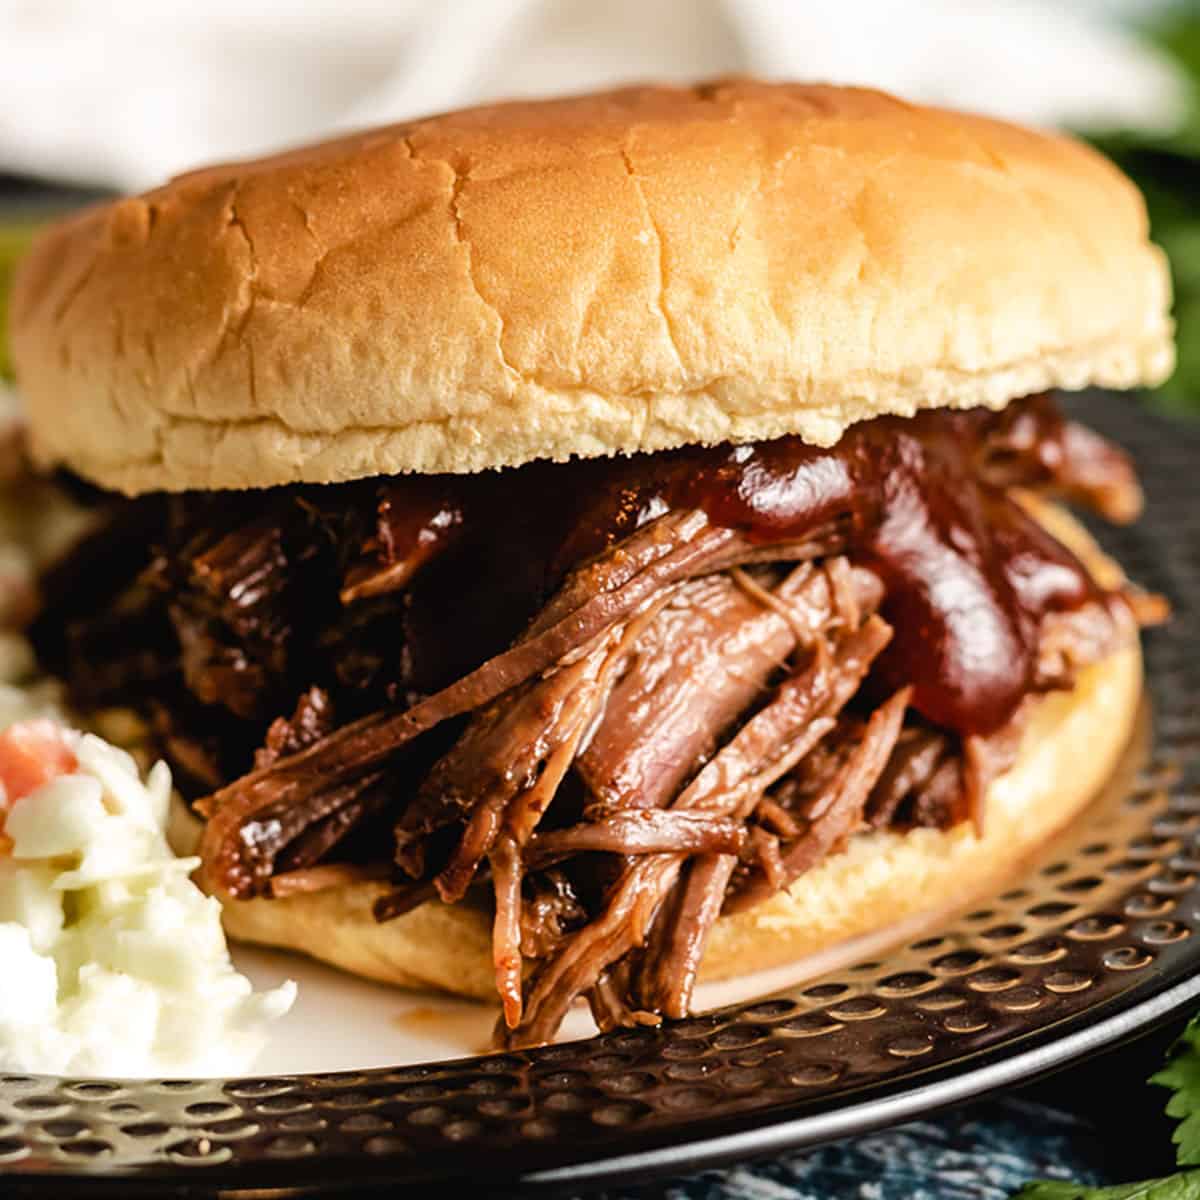 The shredded BBQ beef sandwich served with coleslaw.